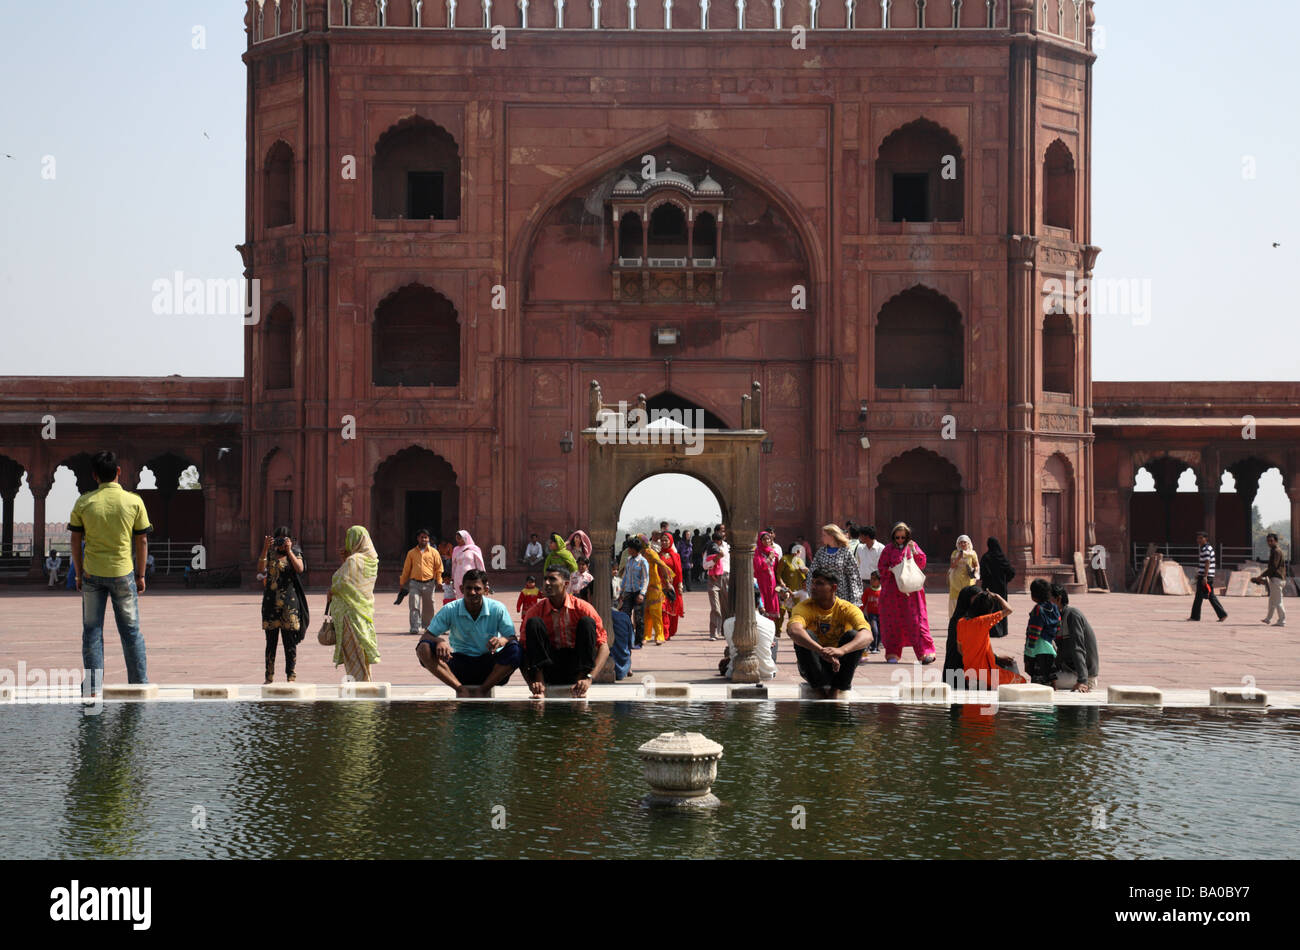 People sit around a fountain at Jama Masjid Mosque, Old Delhi, India Stock Photo